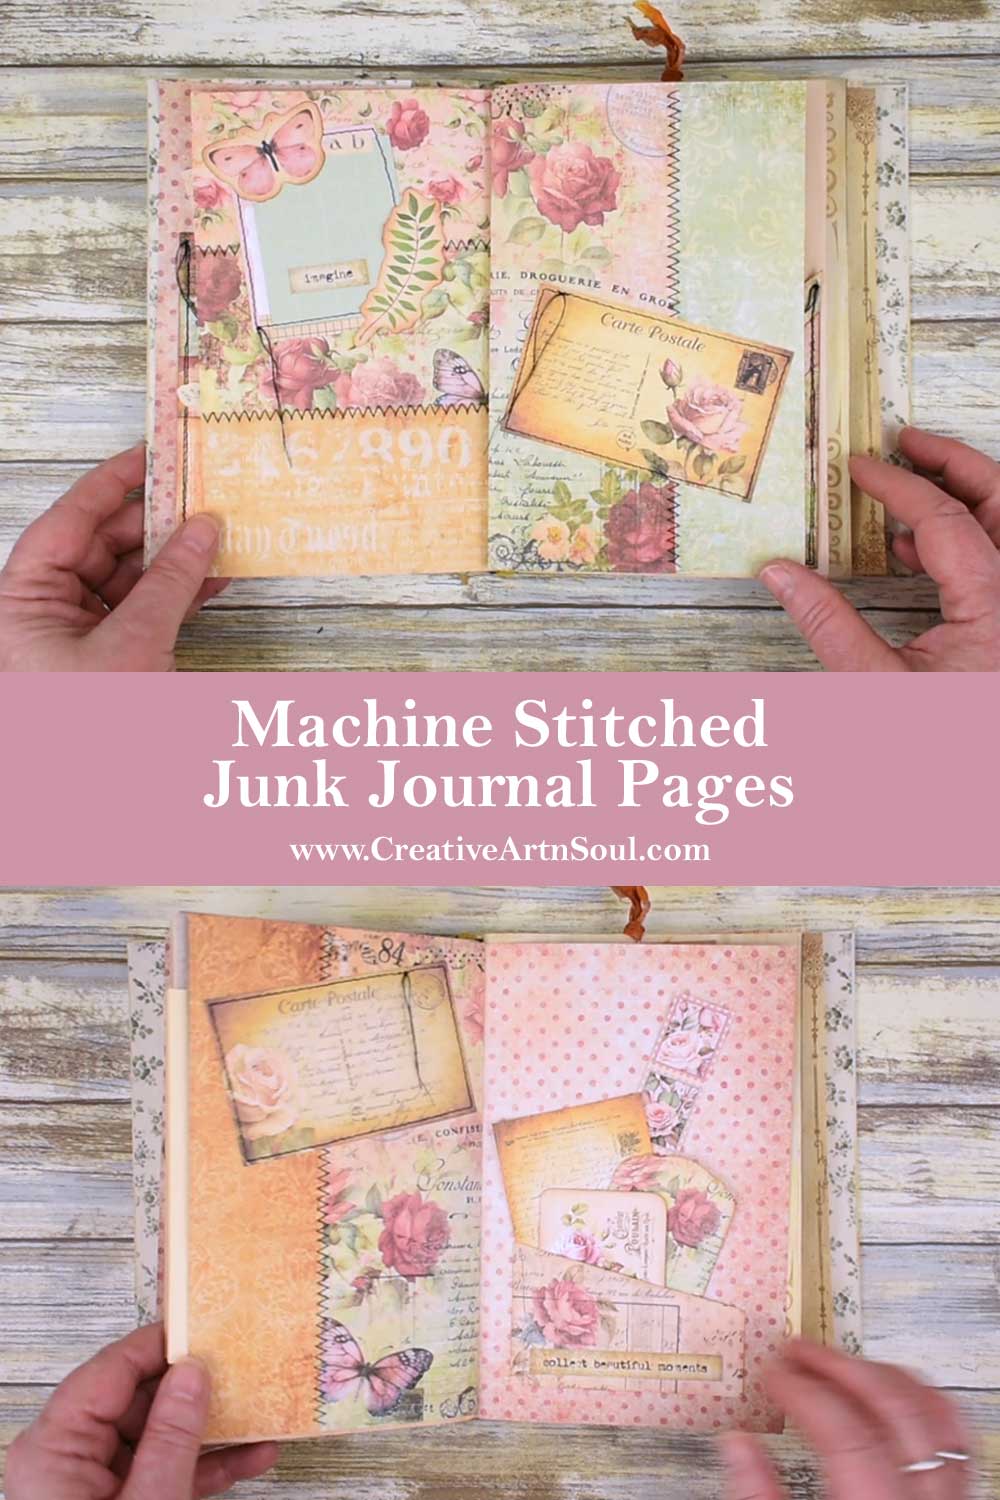 How to Make Machine Stitched Junk Journal Pages